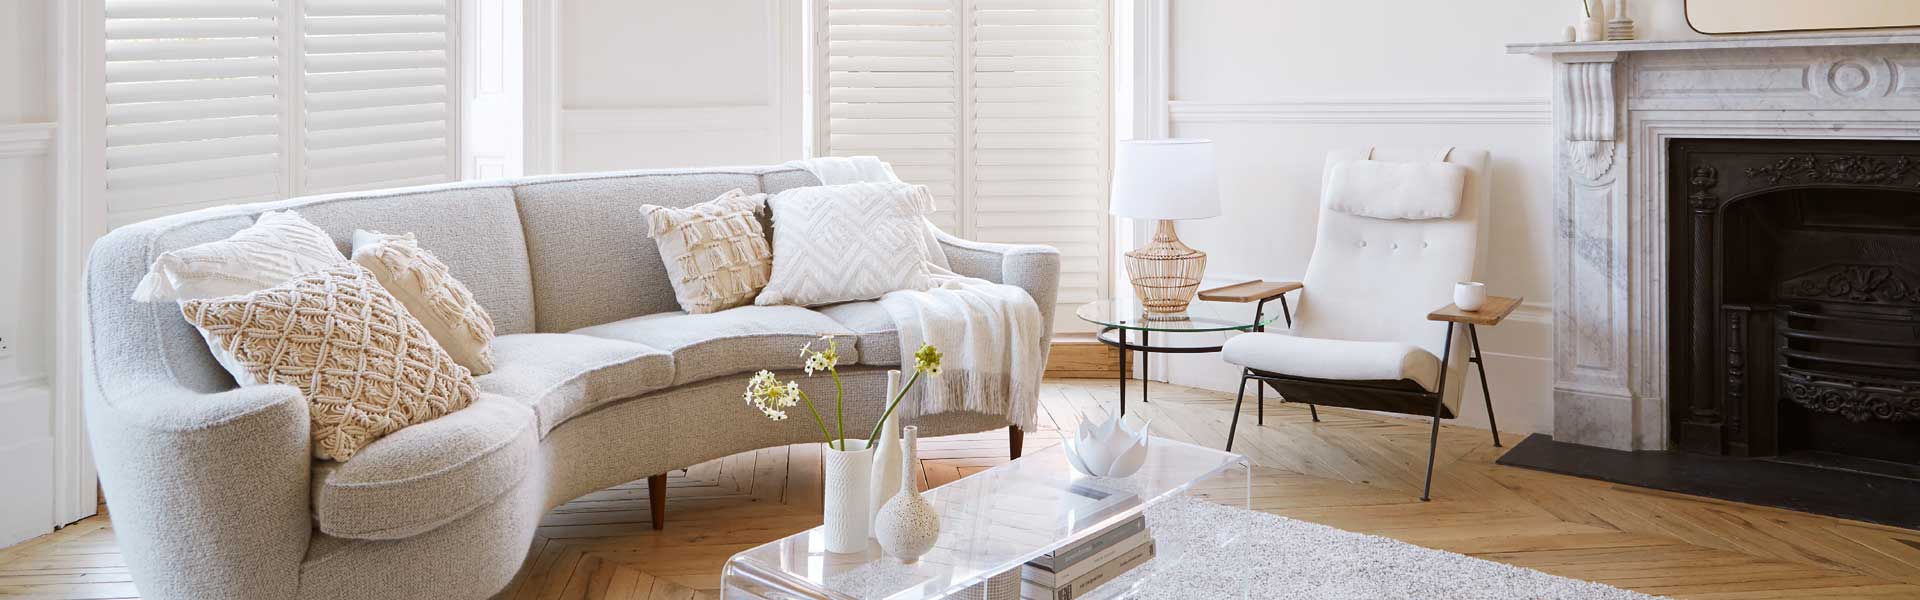 shutters and blinds Living Room Shutters